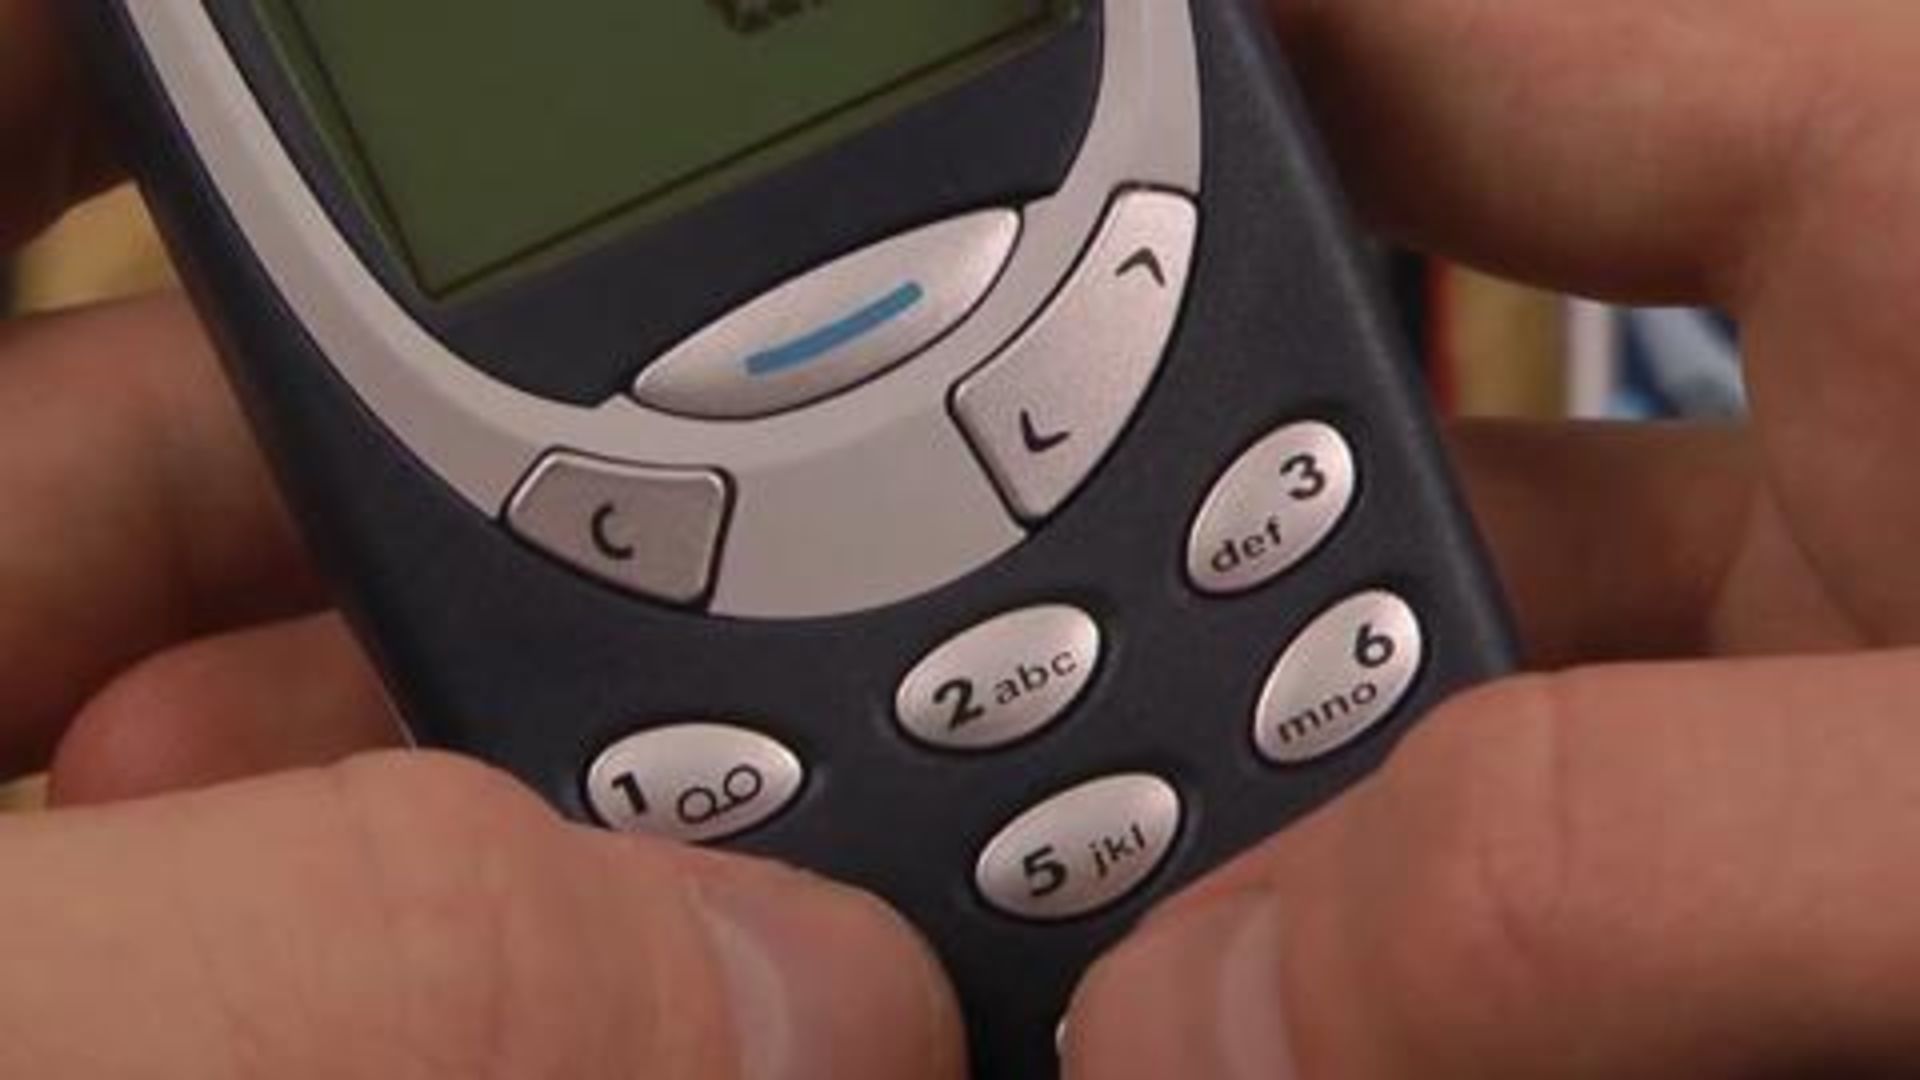 Nokia 3310 relaunch: Why we still love the phone that defined the Nokia era